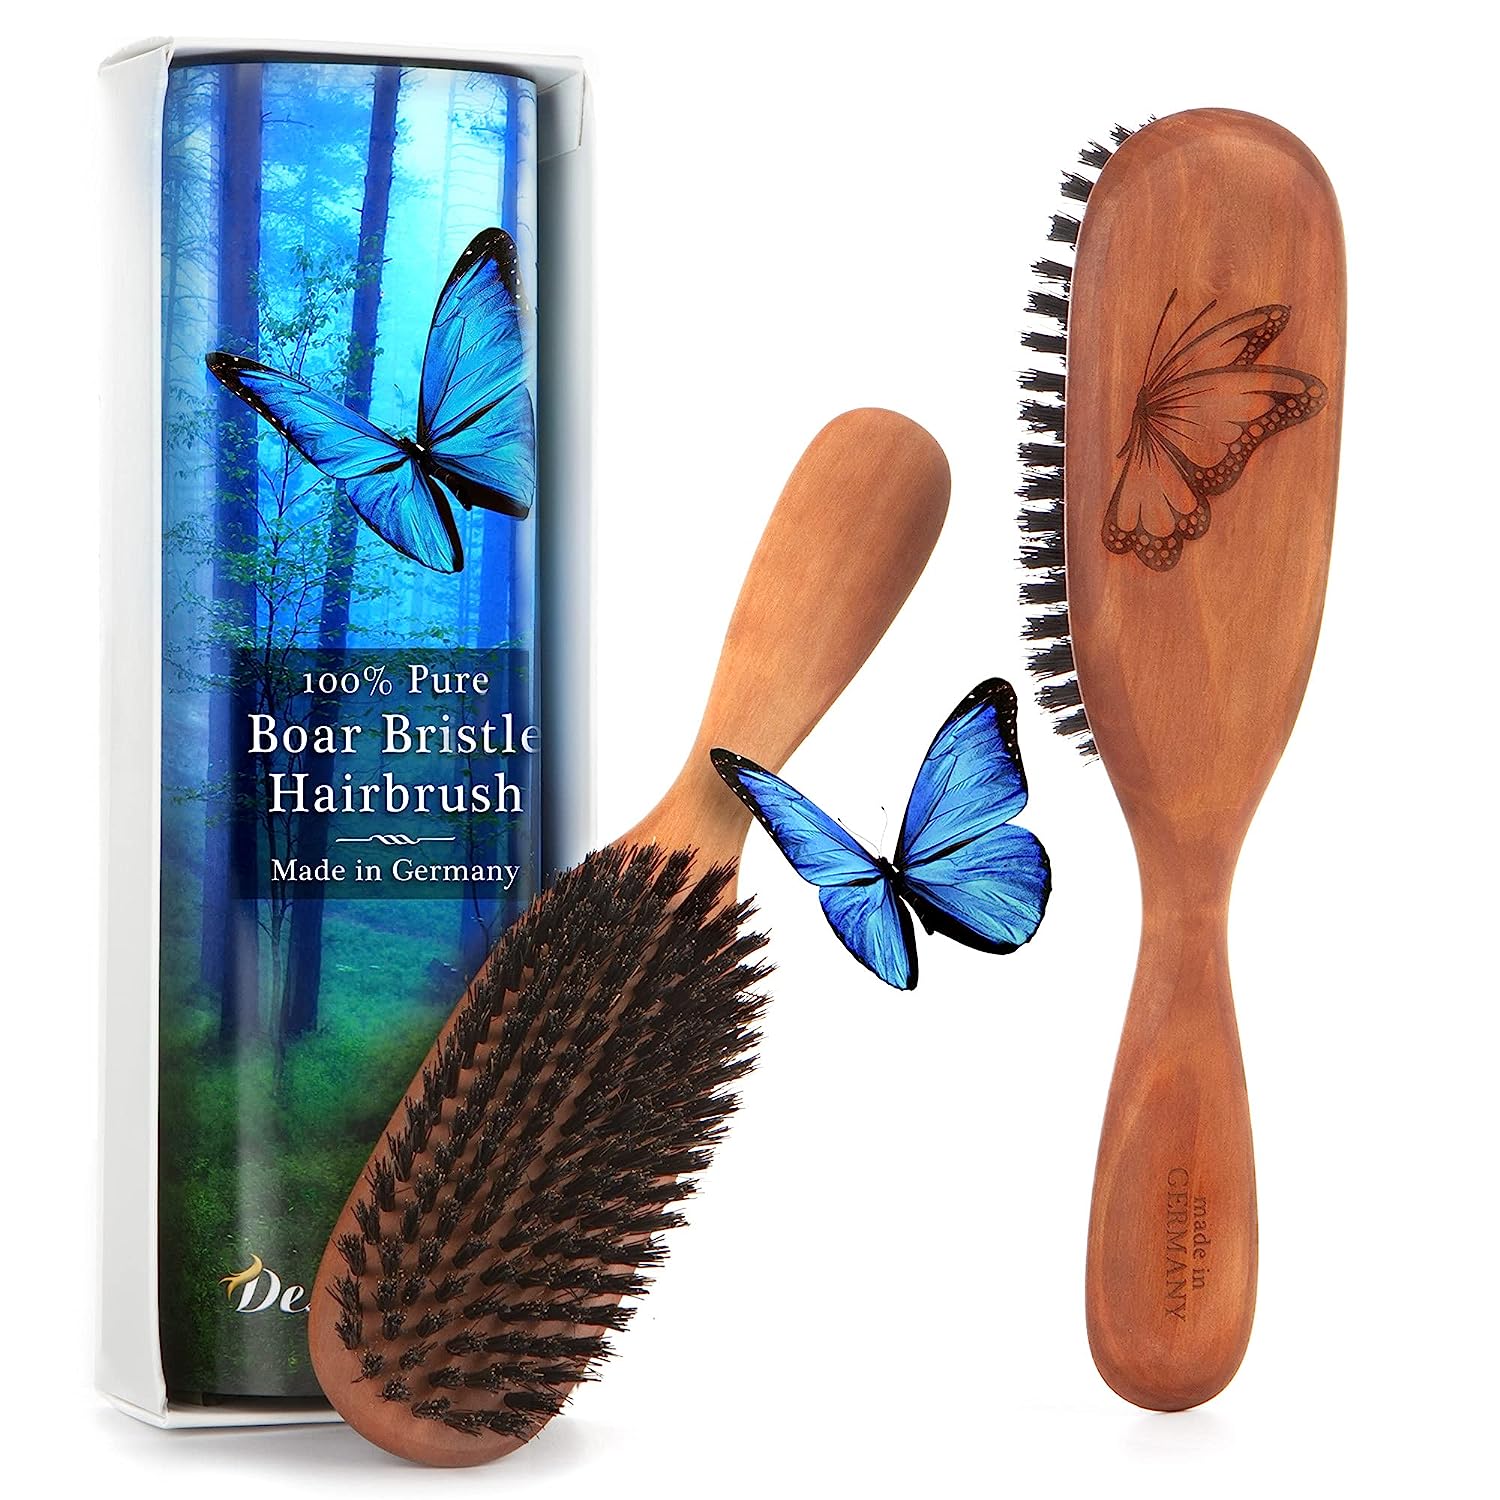 Made in Germany, 100% Pure Wild Boar Bristle Hair [...]